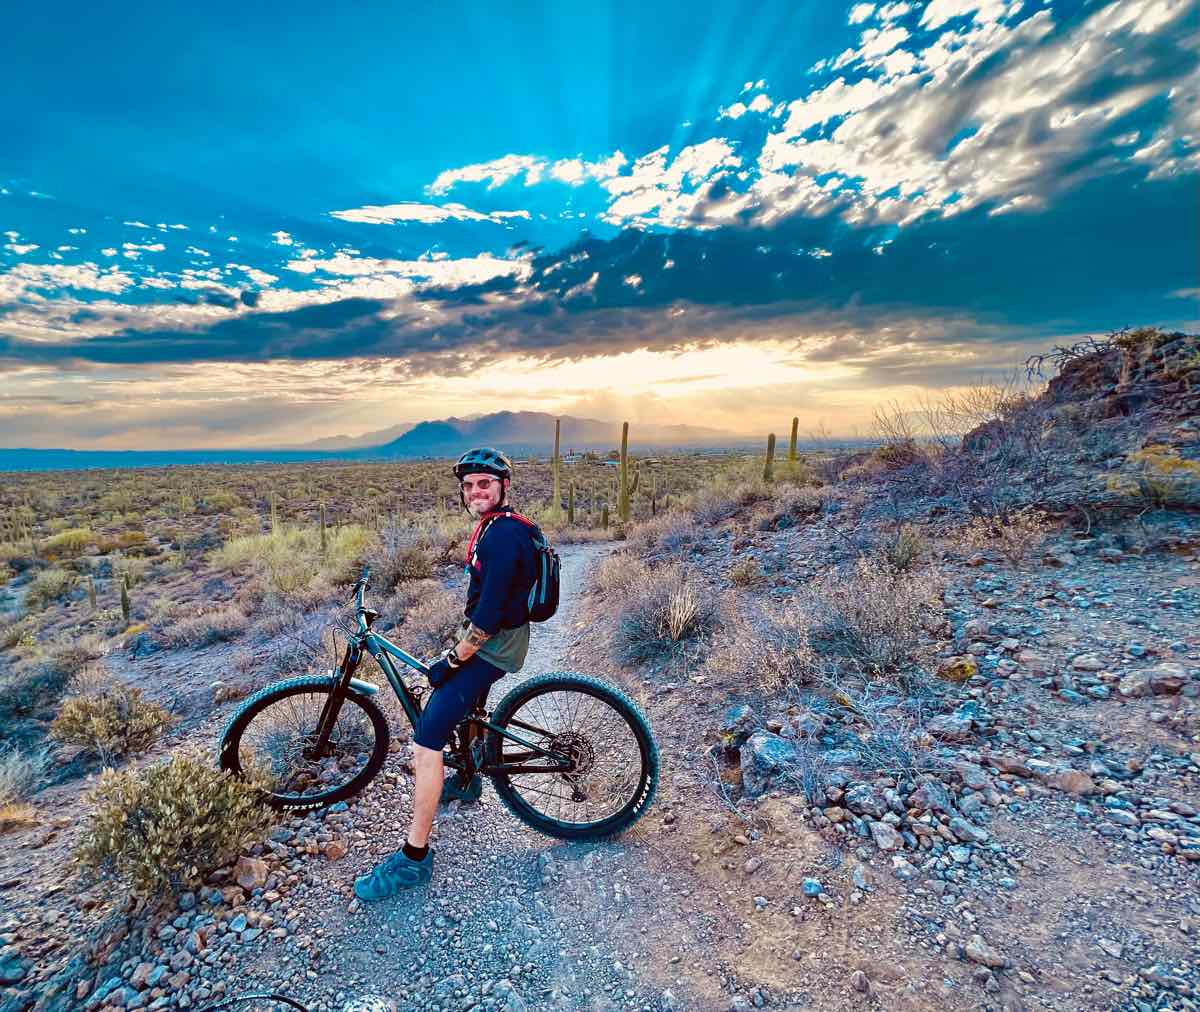 bikerumor pic of the day a mountain biker sits on their bicycle on a rocky dirt trail in arizona there is scrub brush on either side of the trail and a low mountain in the distance the sun is very low and is blocked by a series of clouds along the horizon creating rays that shoot up into the sky.